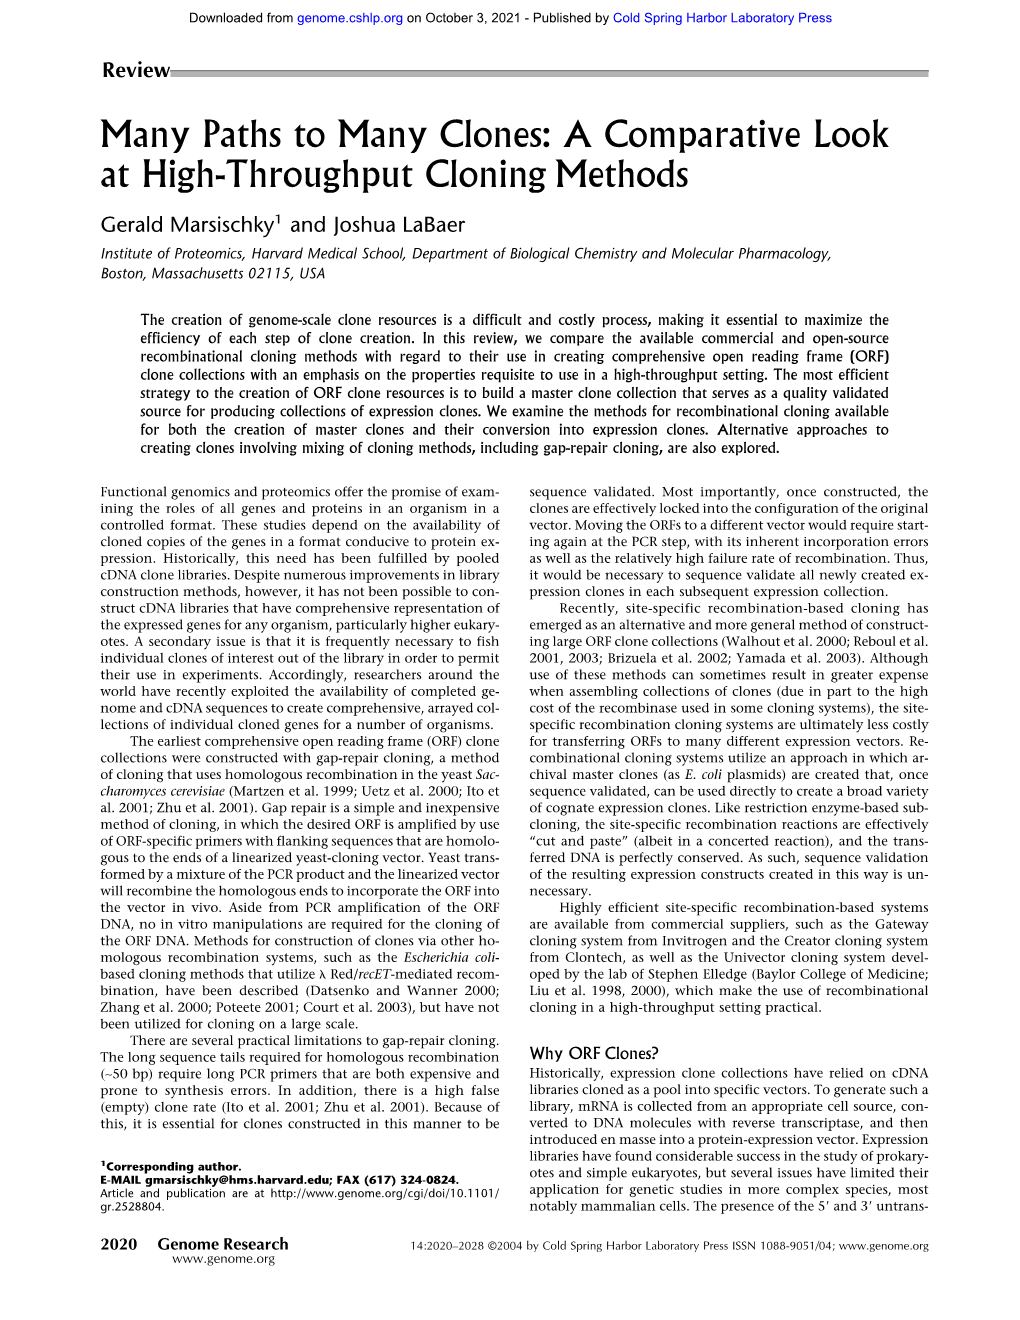 A Comparative Look at High-Throughput Cloning Methods